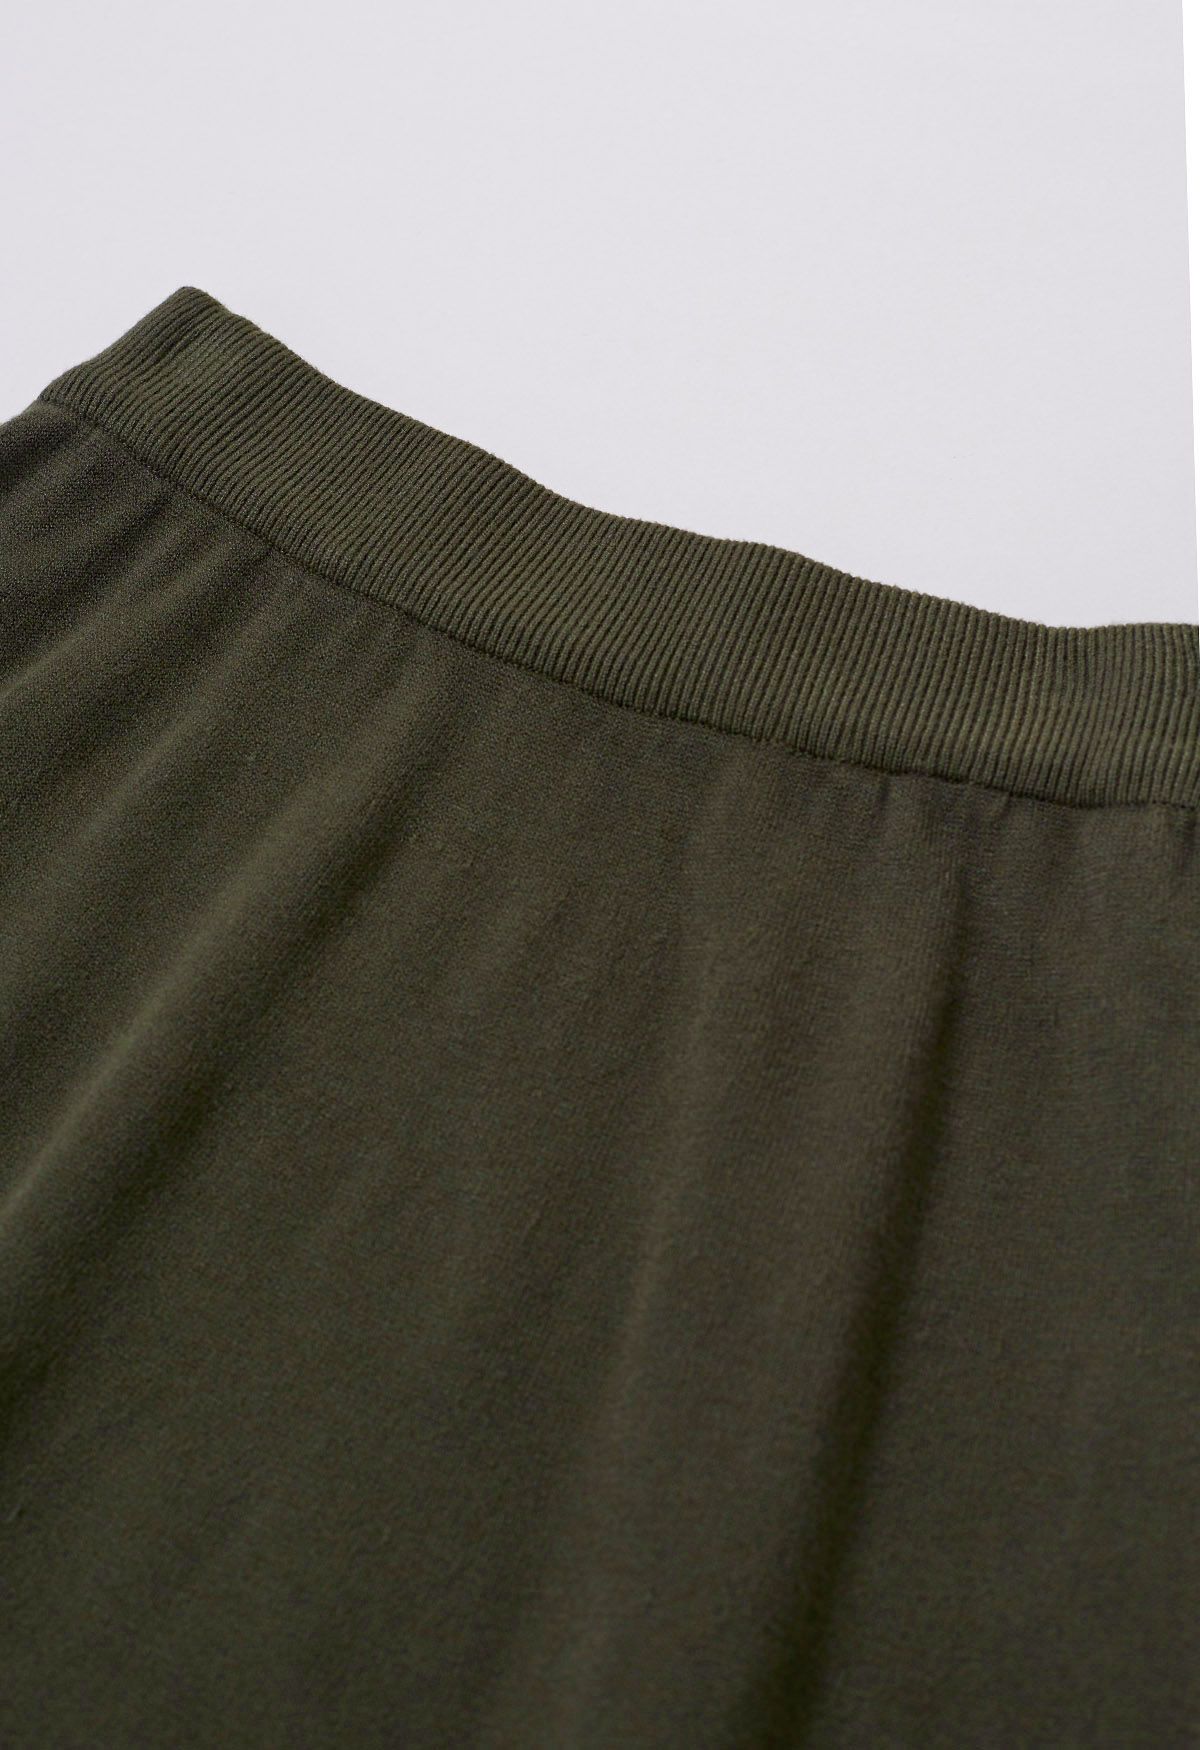 Zigzag Hemline Hollow Out Knit Midi Skirt in Army Green